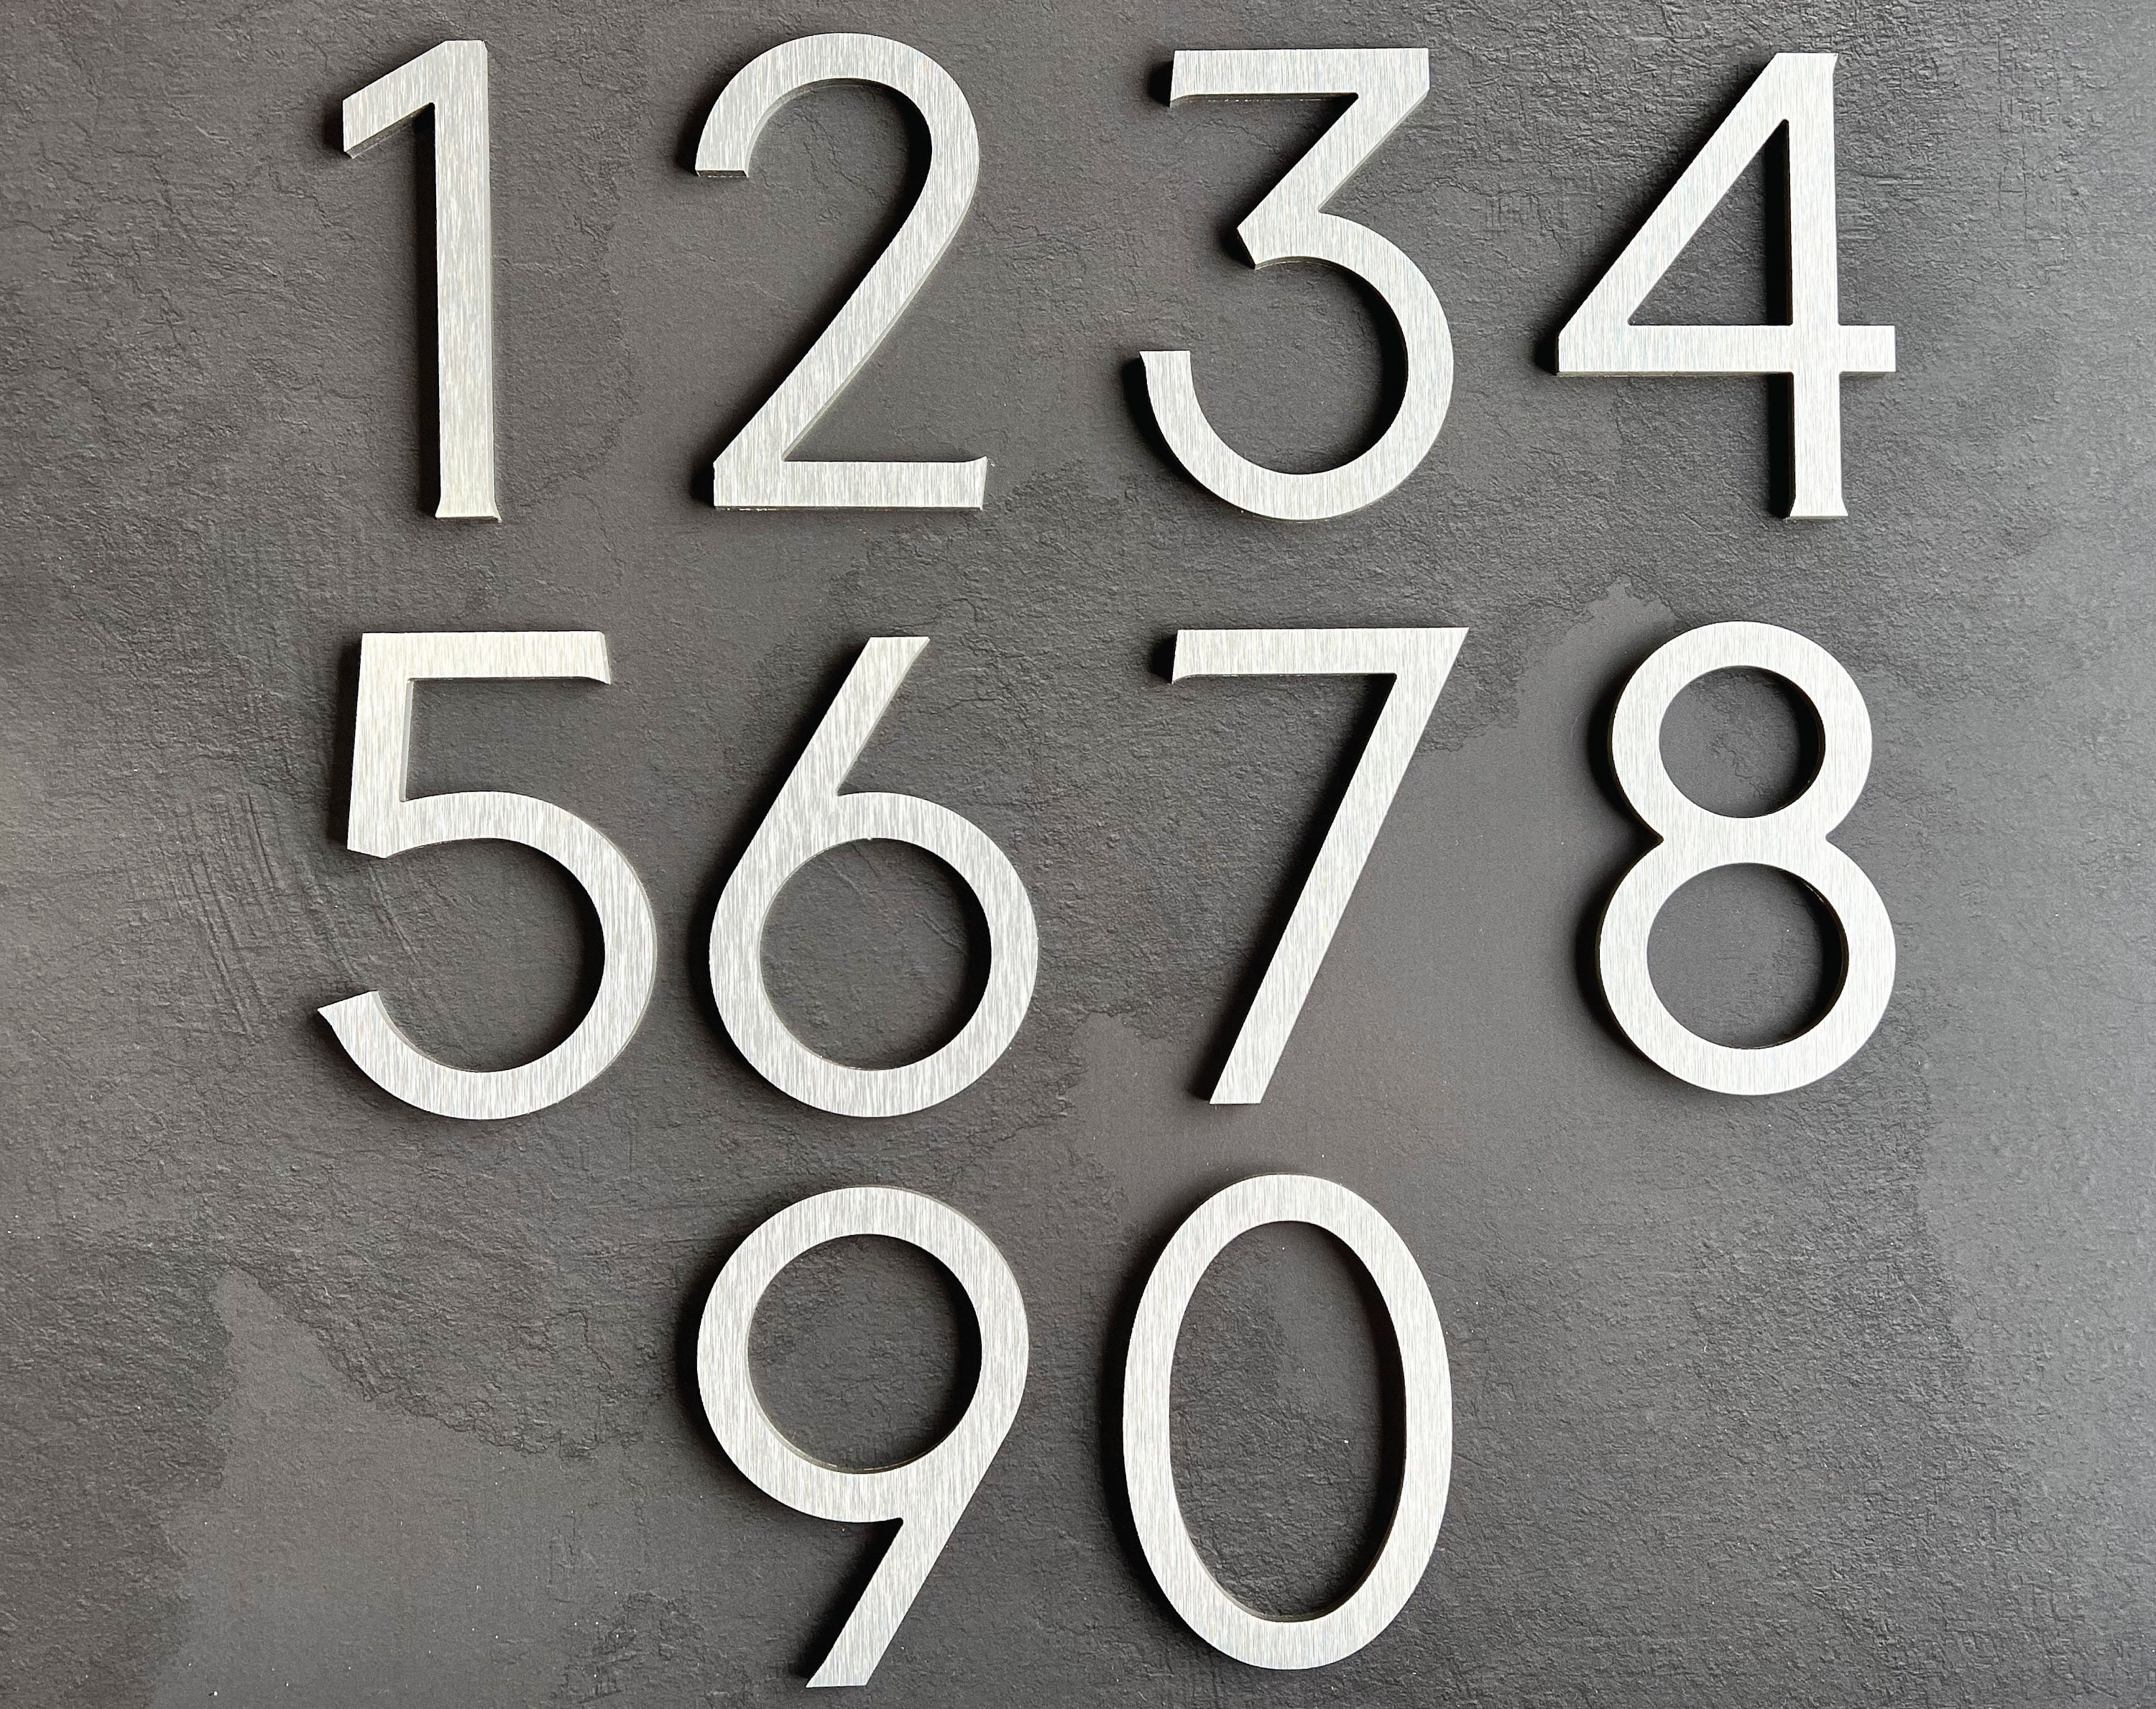 Metal House Numbers / Metal Address Numbers / Modern House Numbers /  Address Sign / Brushed Aluminum Numbers / 4 House Number